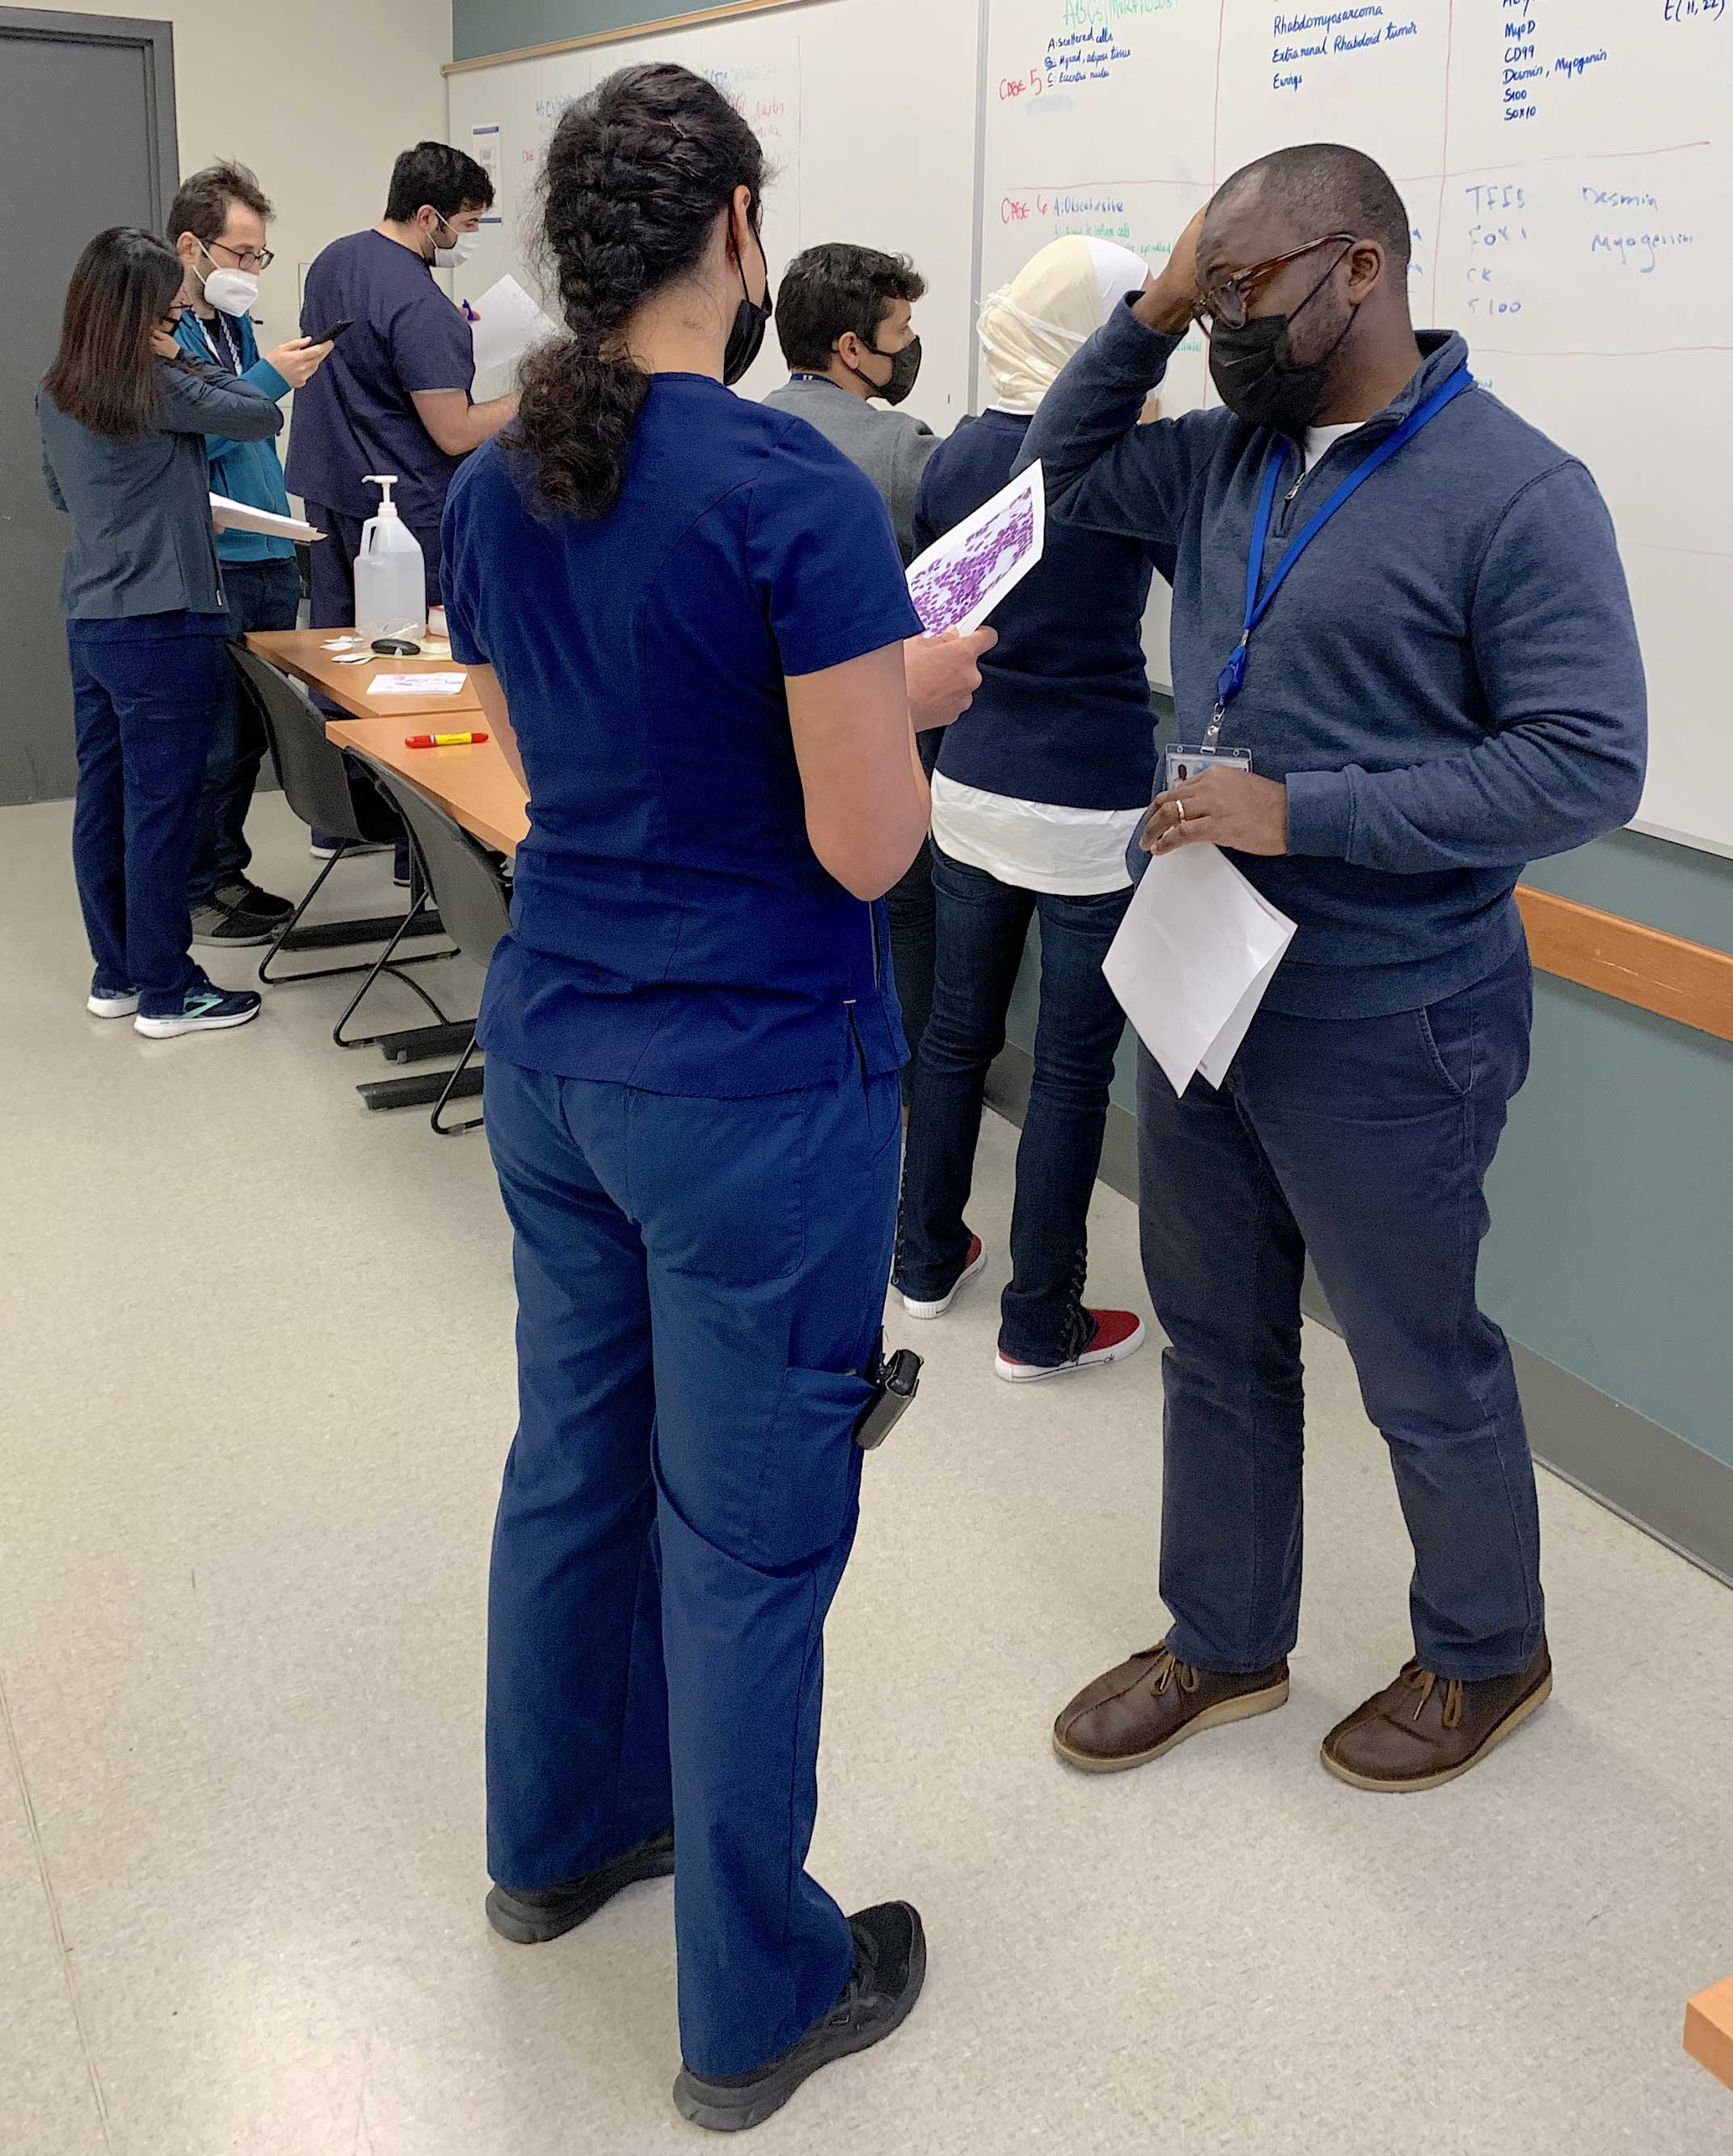 Drs. Asma Arshia and Leonard Yenwongfai discuss the differential diagnosis of metaphyseal bone tumors during a team learning experience.